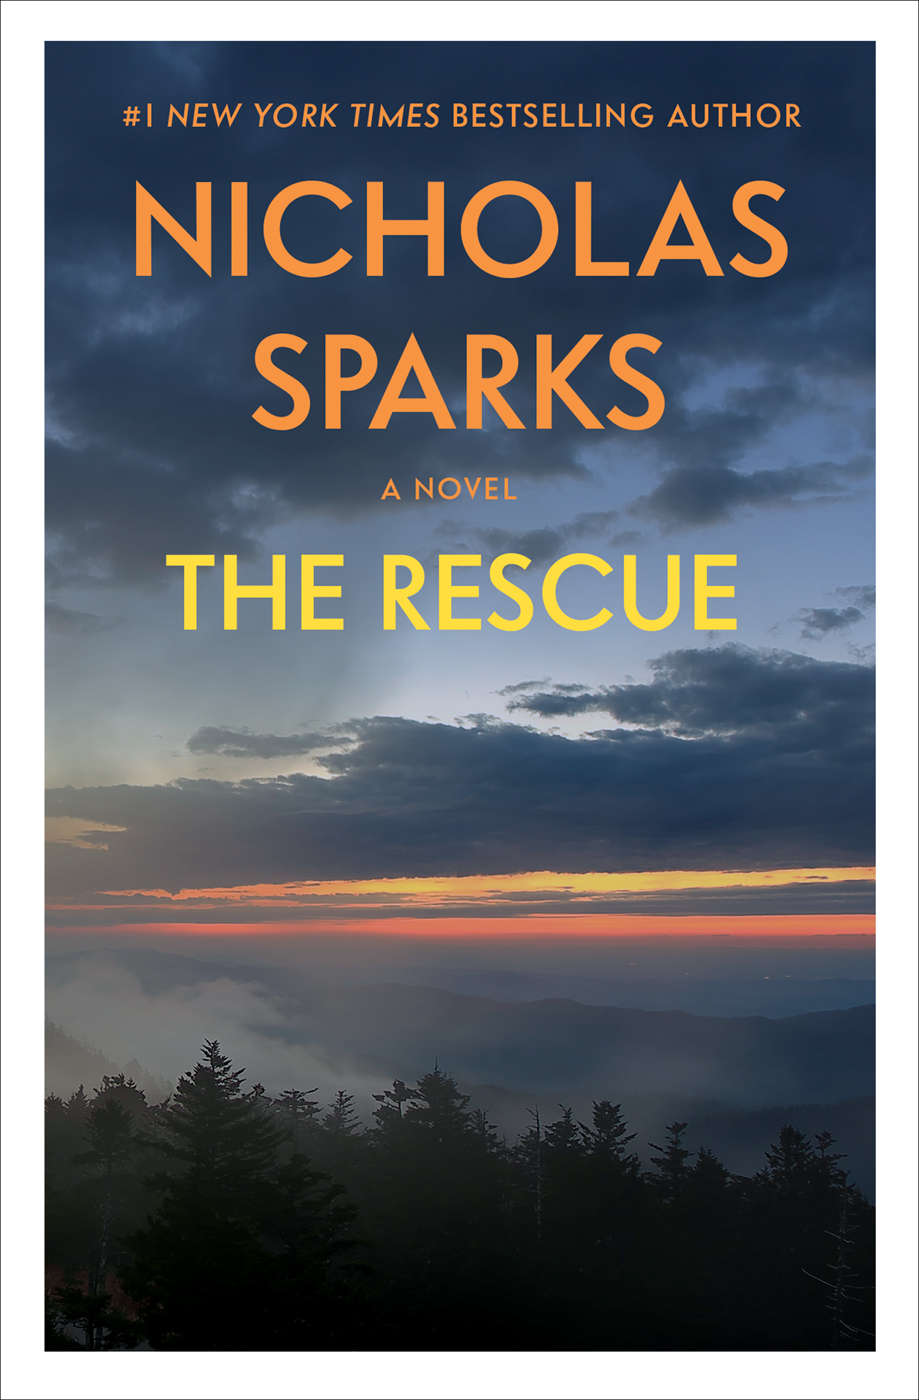 Nicholas Sparks: The Rescue (EBook, 2000, Grand Central Publishing)